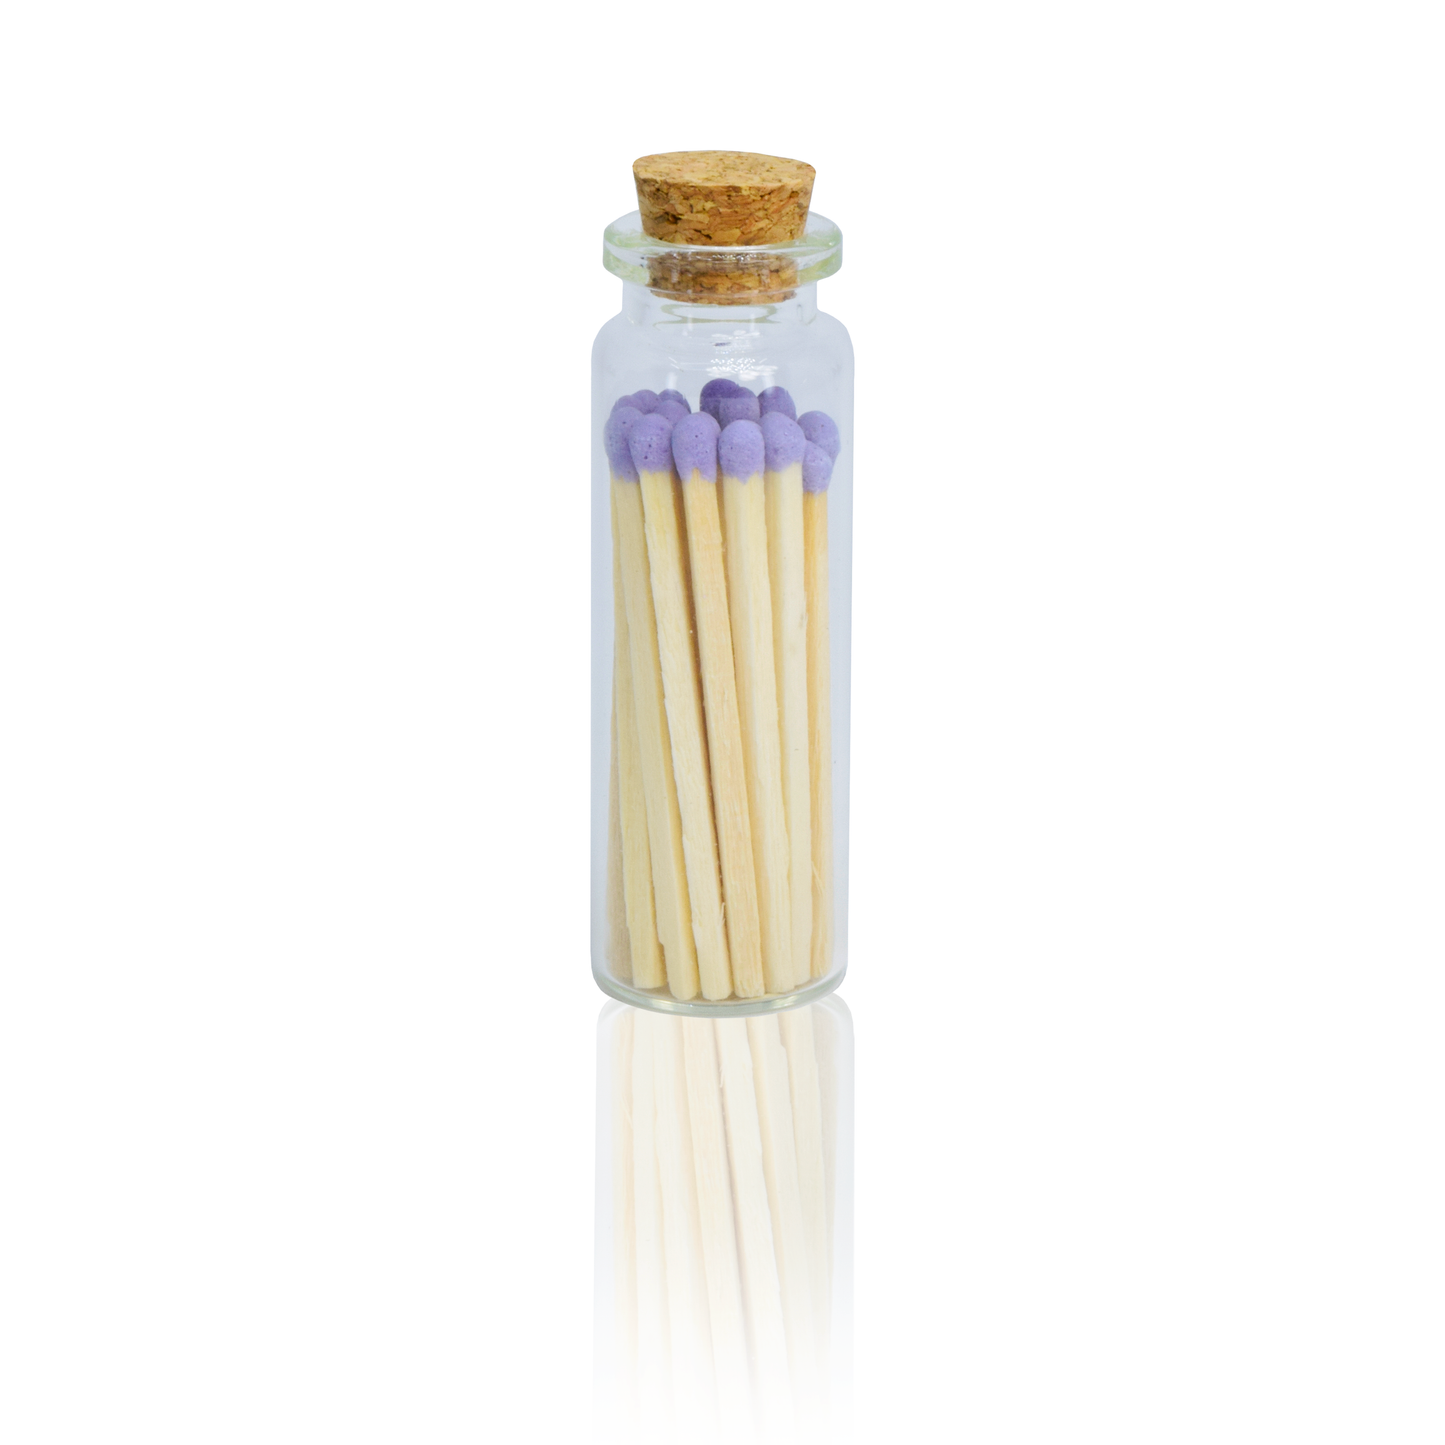 Small Match Bottles - Safety Matches in Jars with Striker: 20 Matchsticks Jar / Charcoal